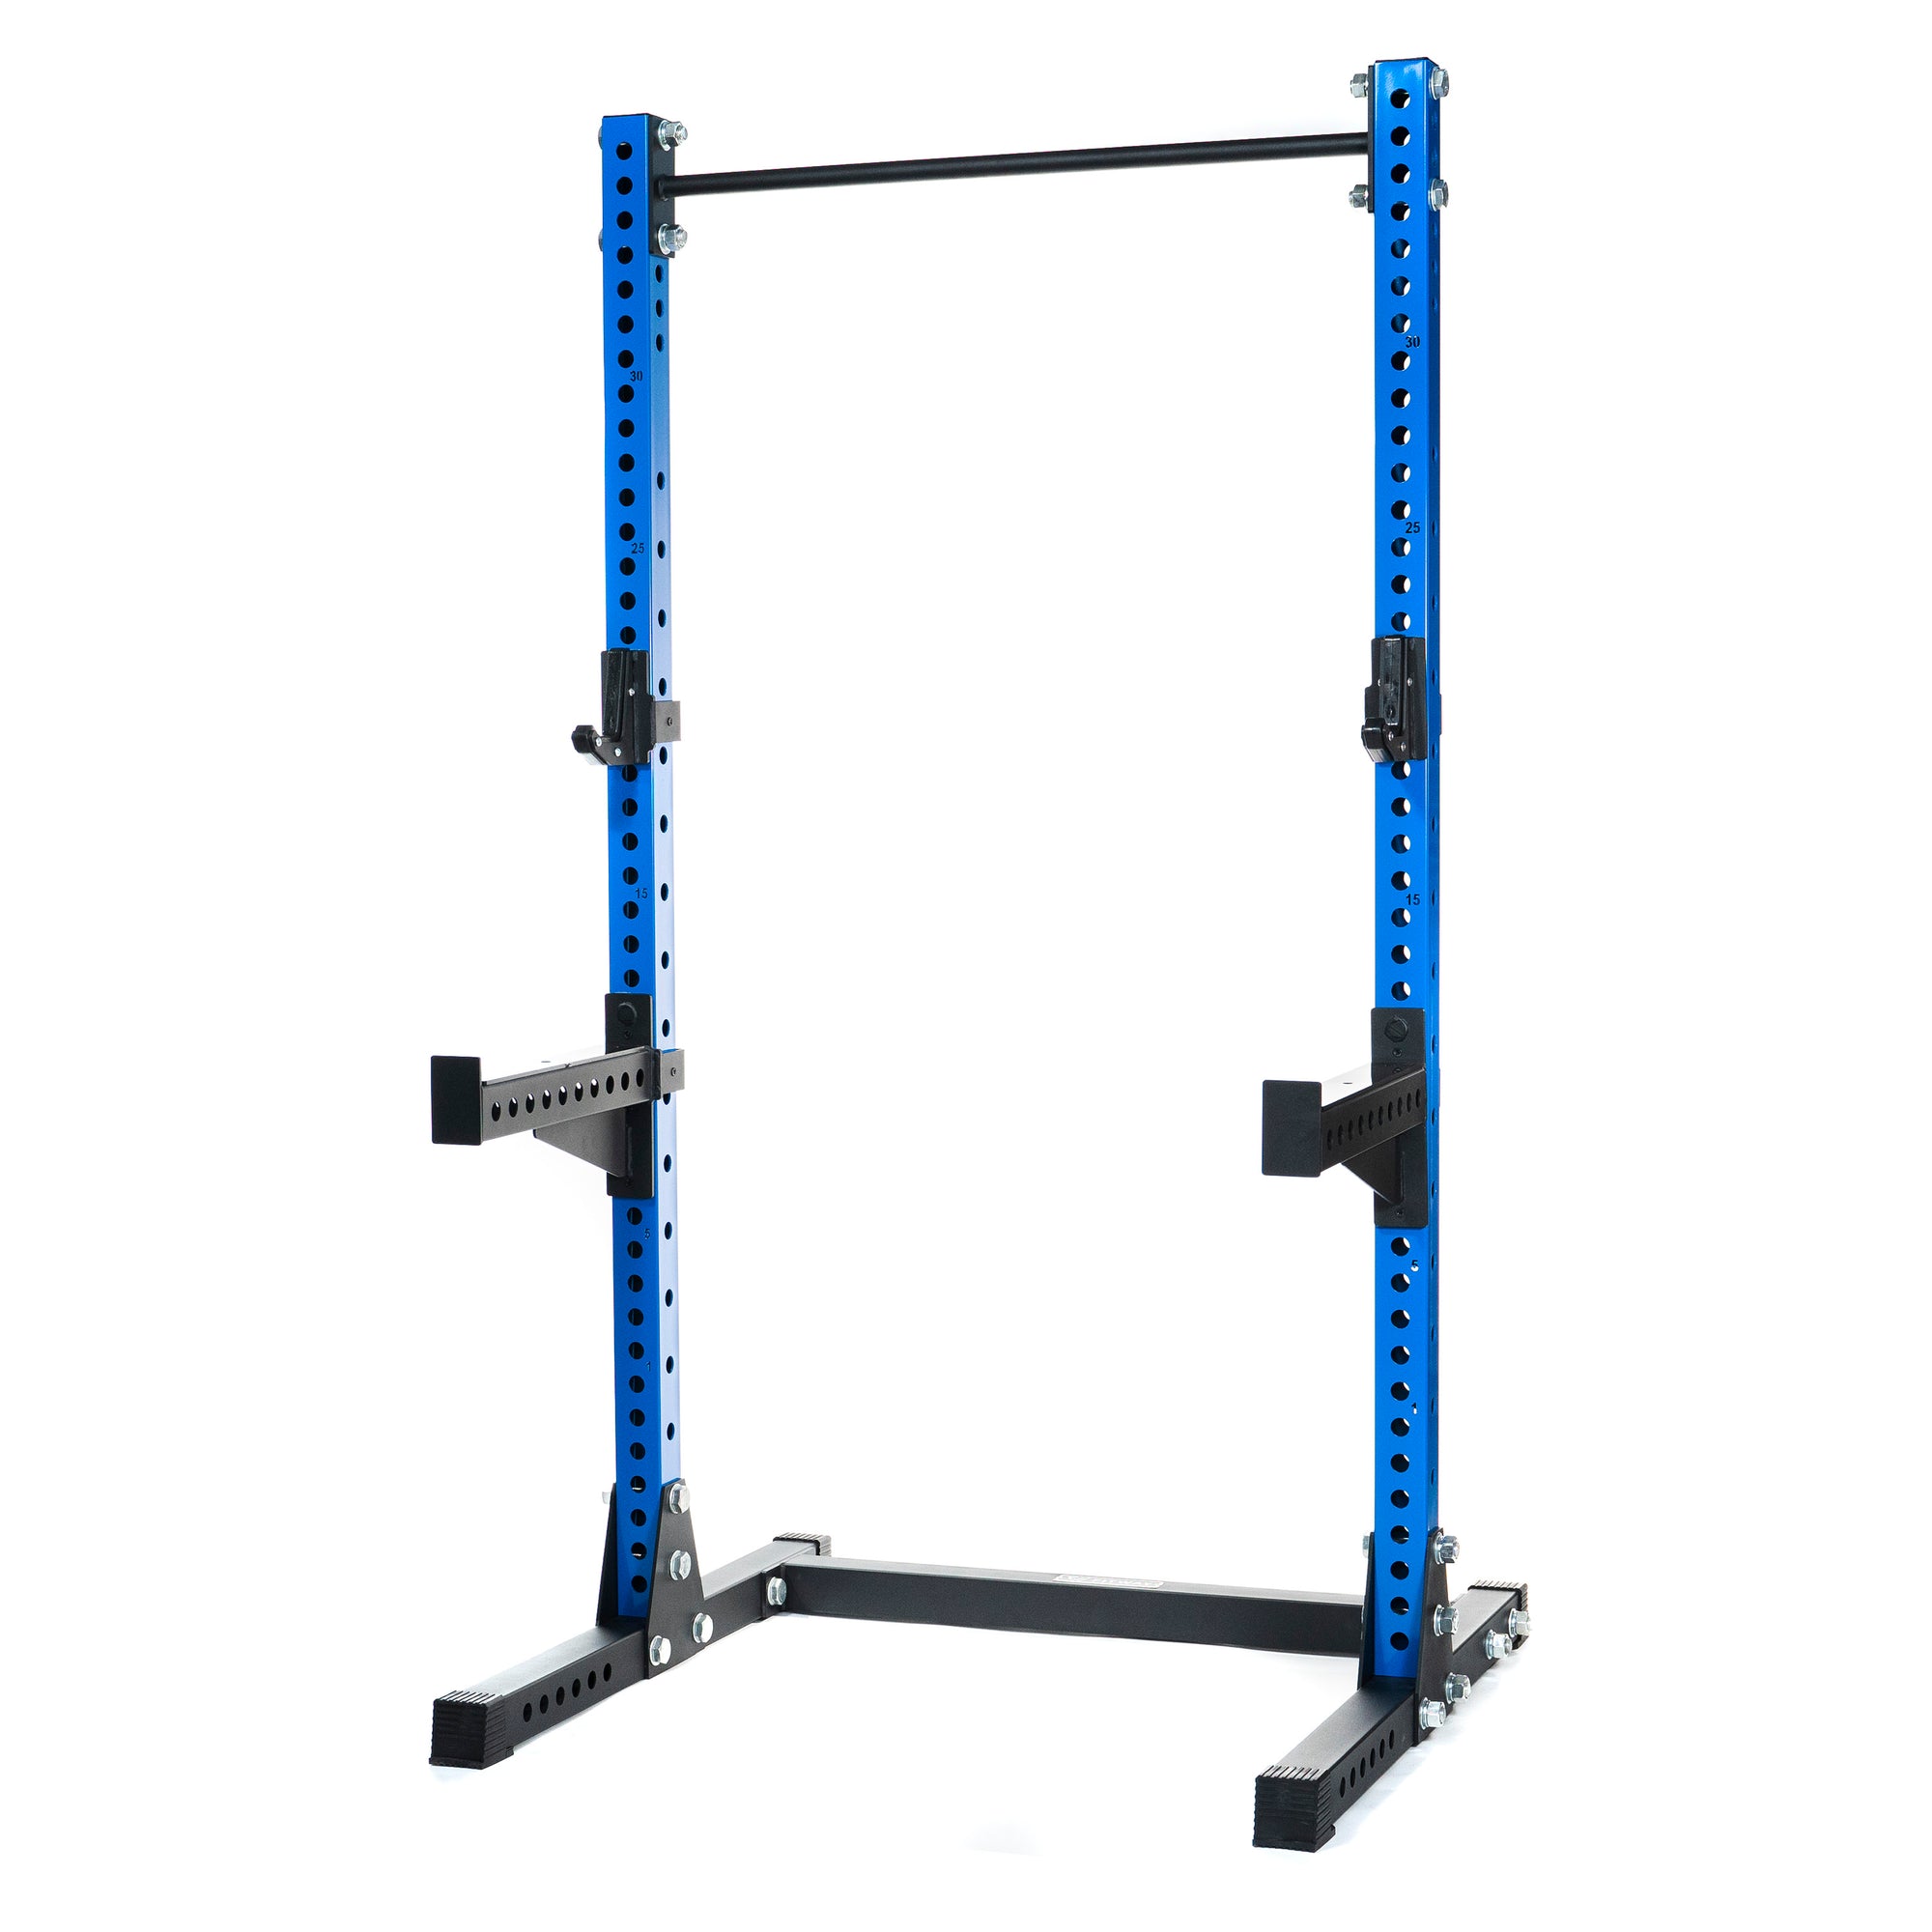 FitWay Equip. HALF RACK WITH SPOTTER ARMS 